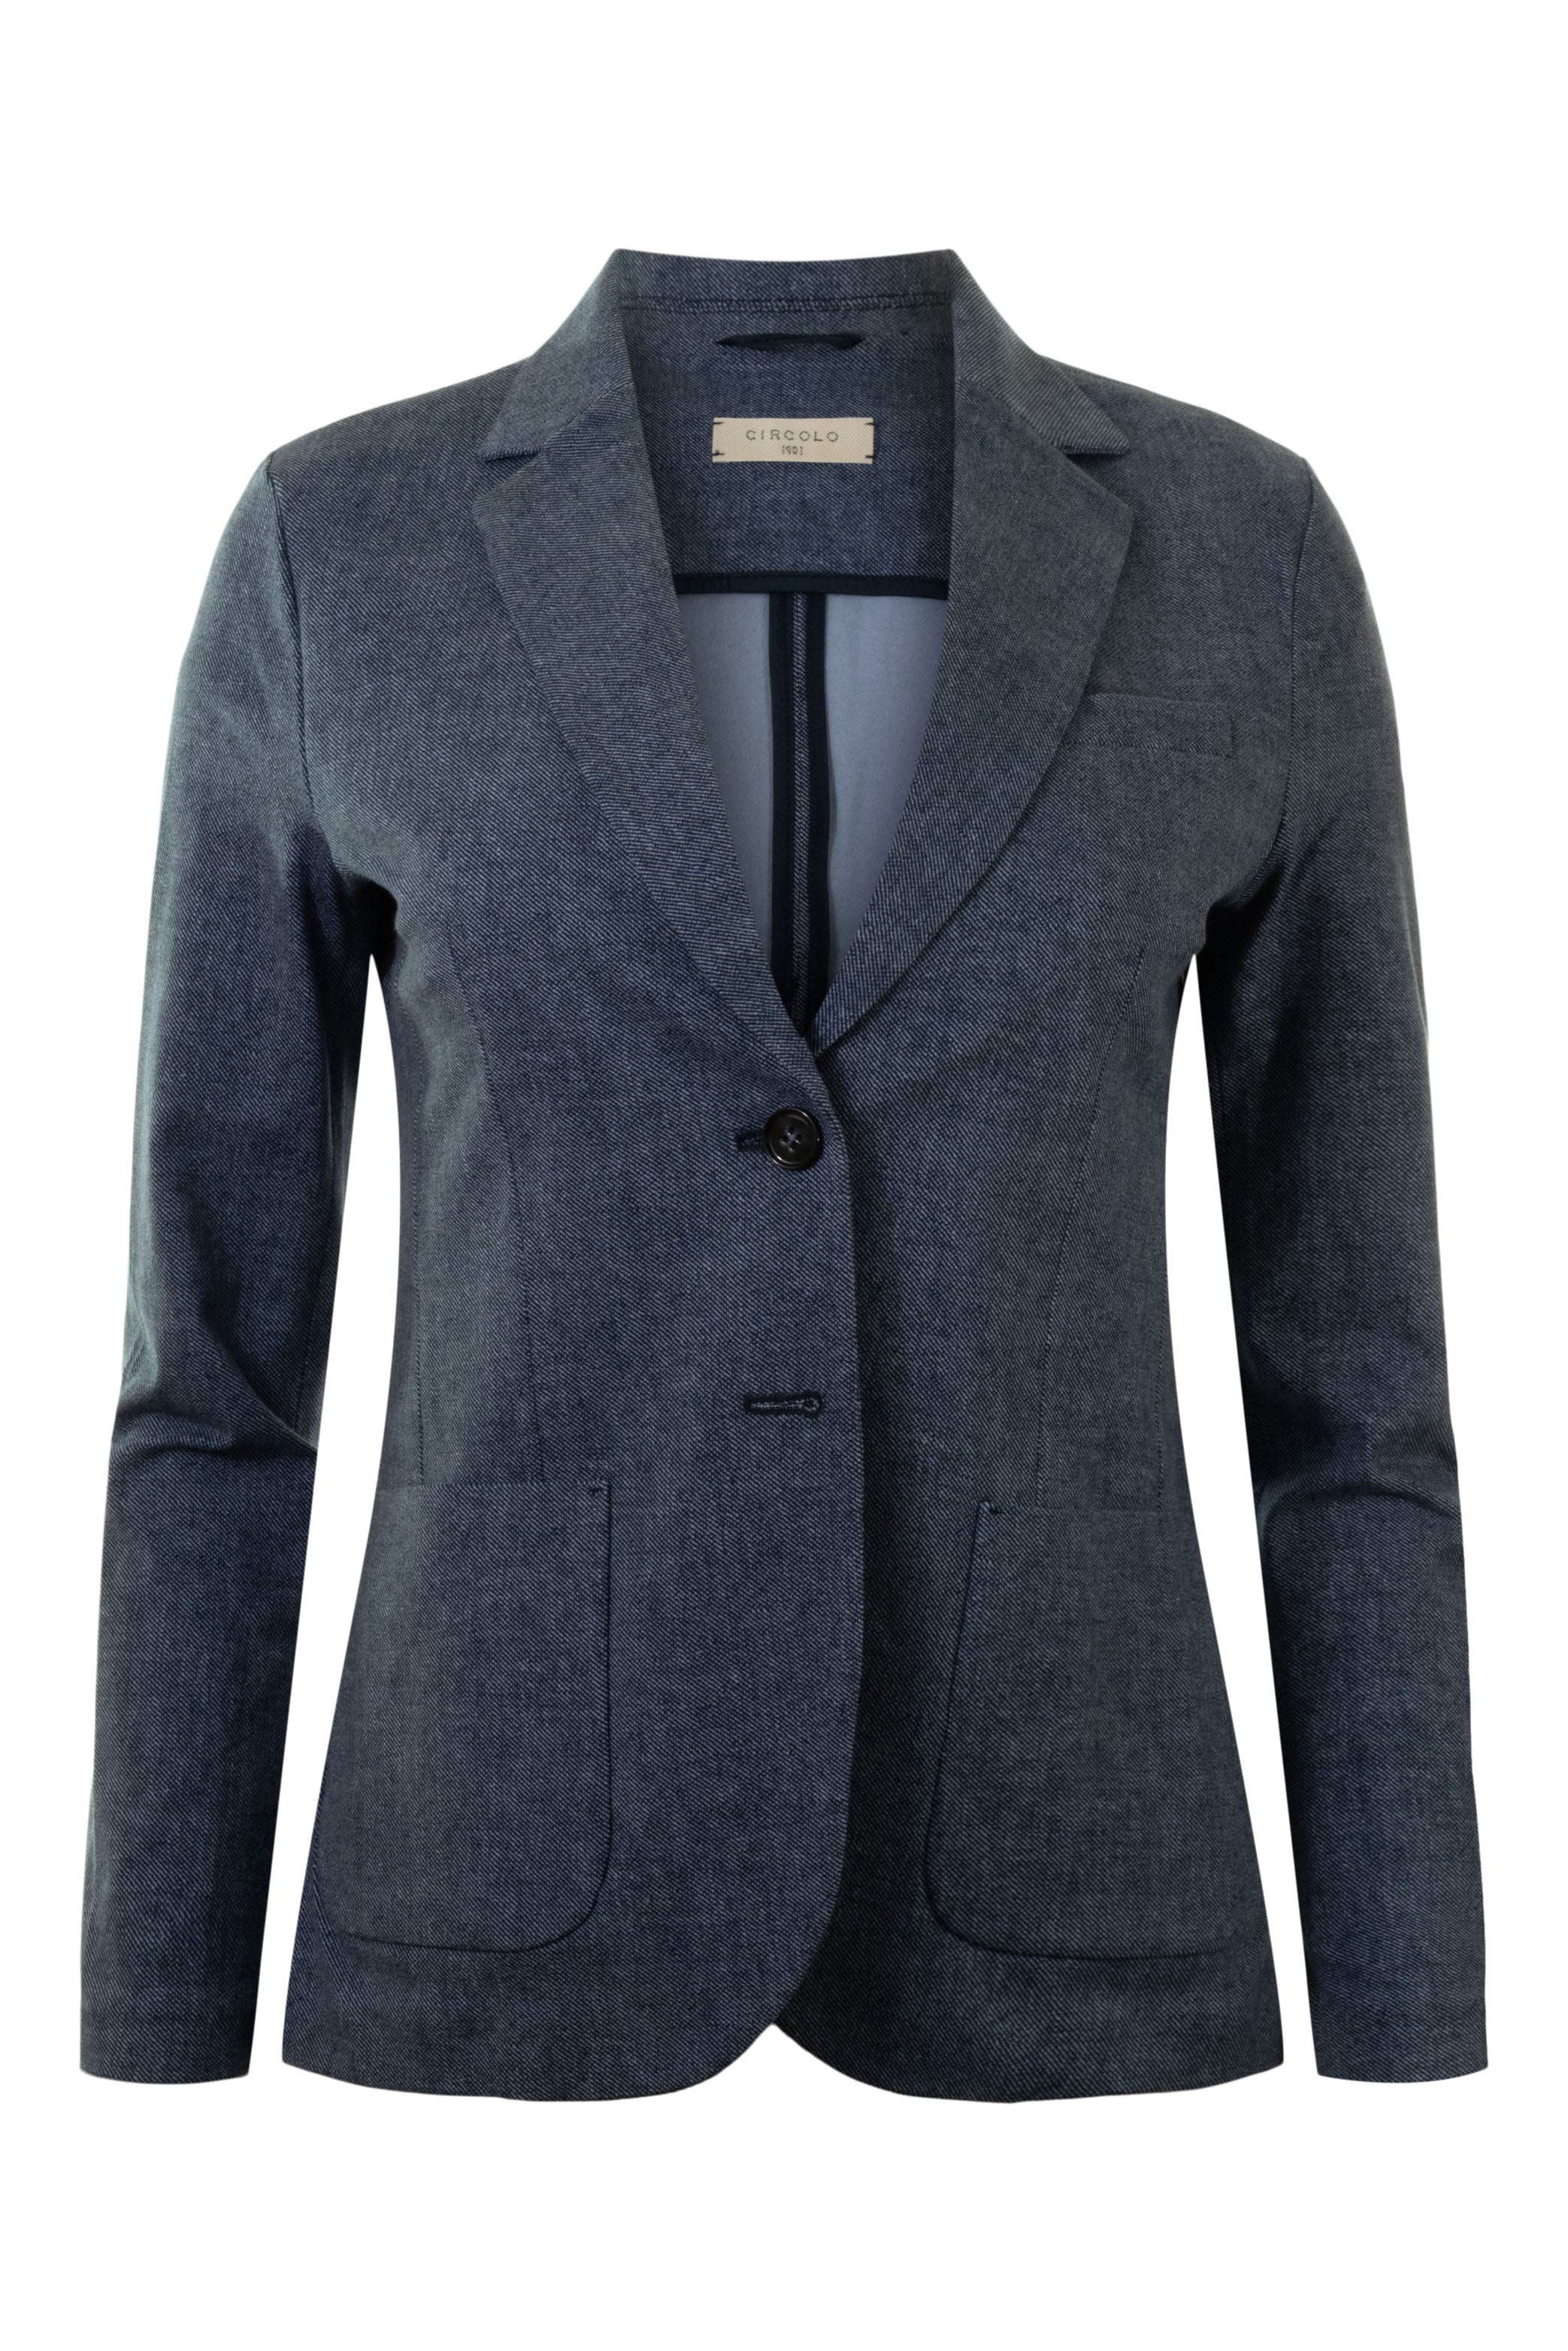 Circolo 1901 2 Button Knit Jacket in Indaco